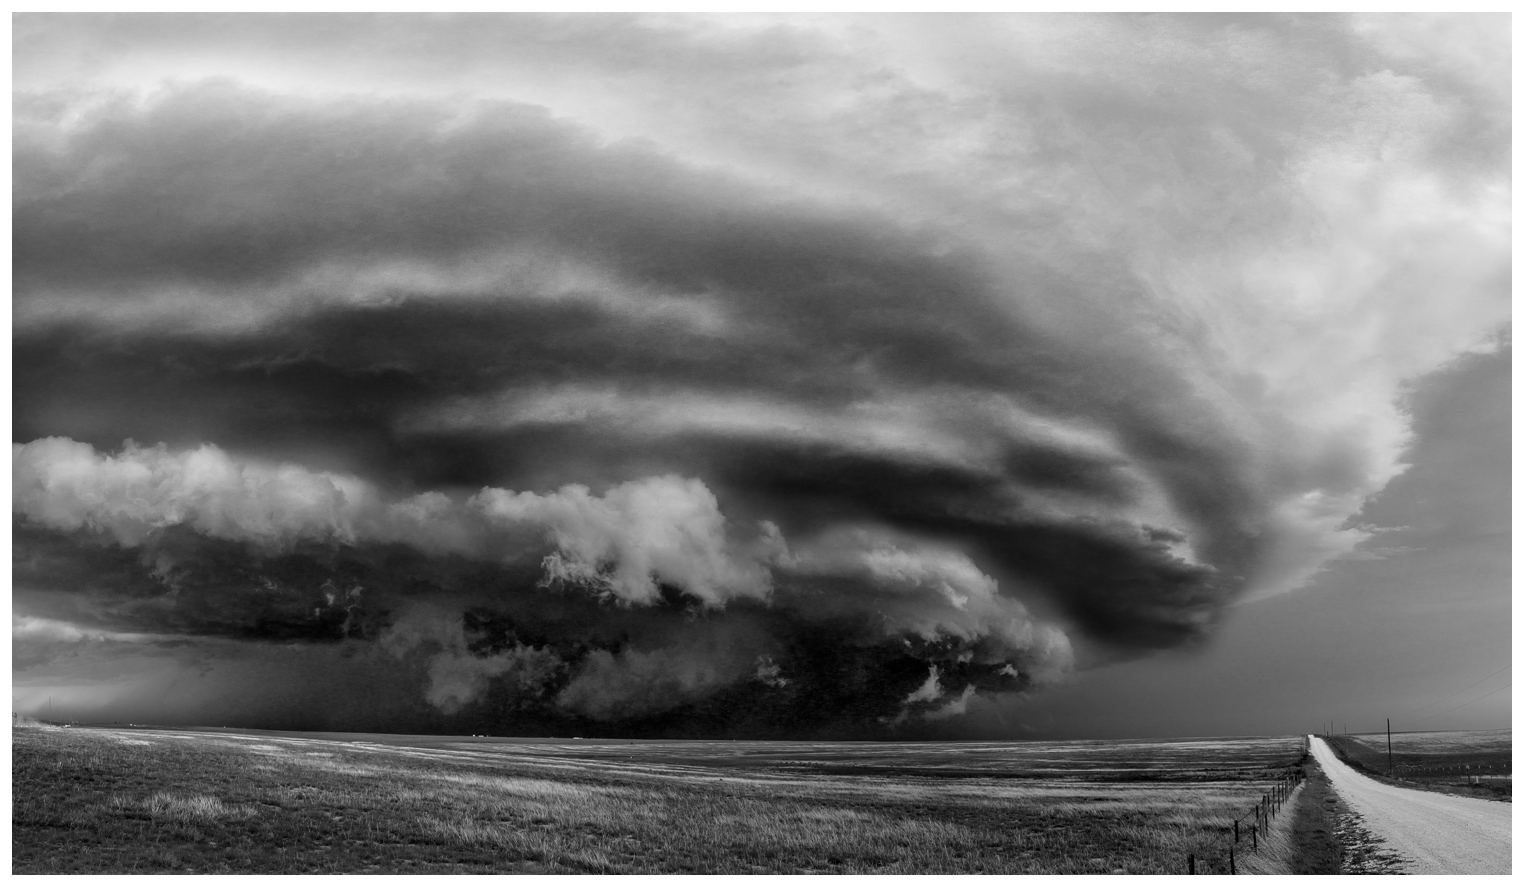 Supercell in Western Kansas